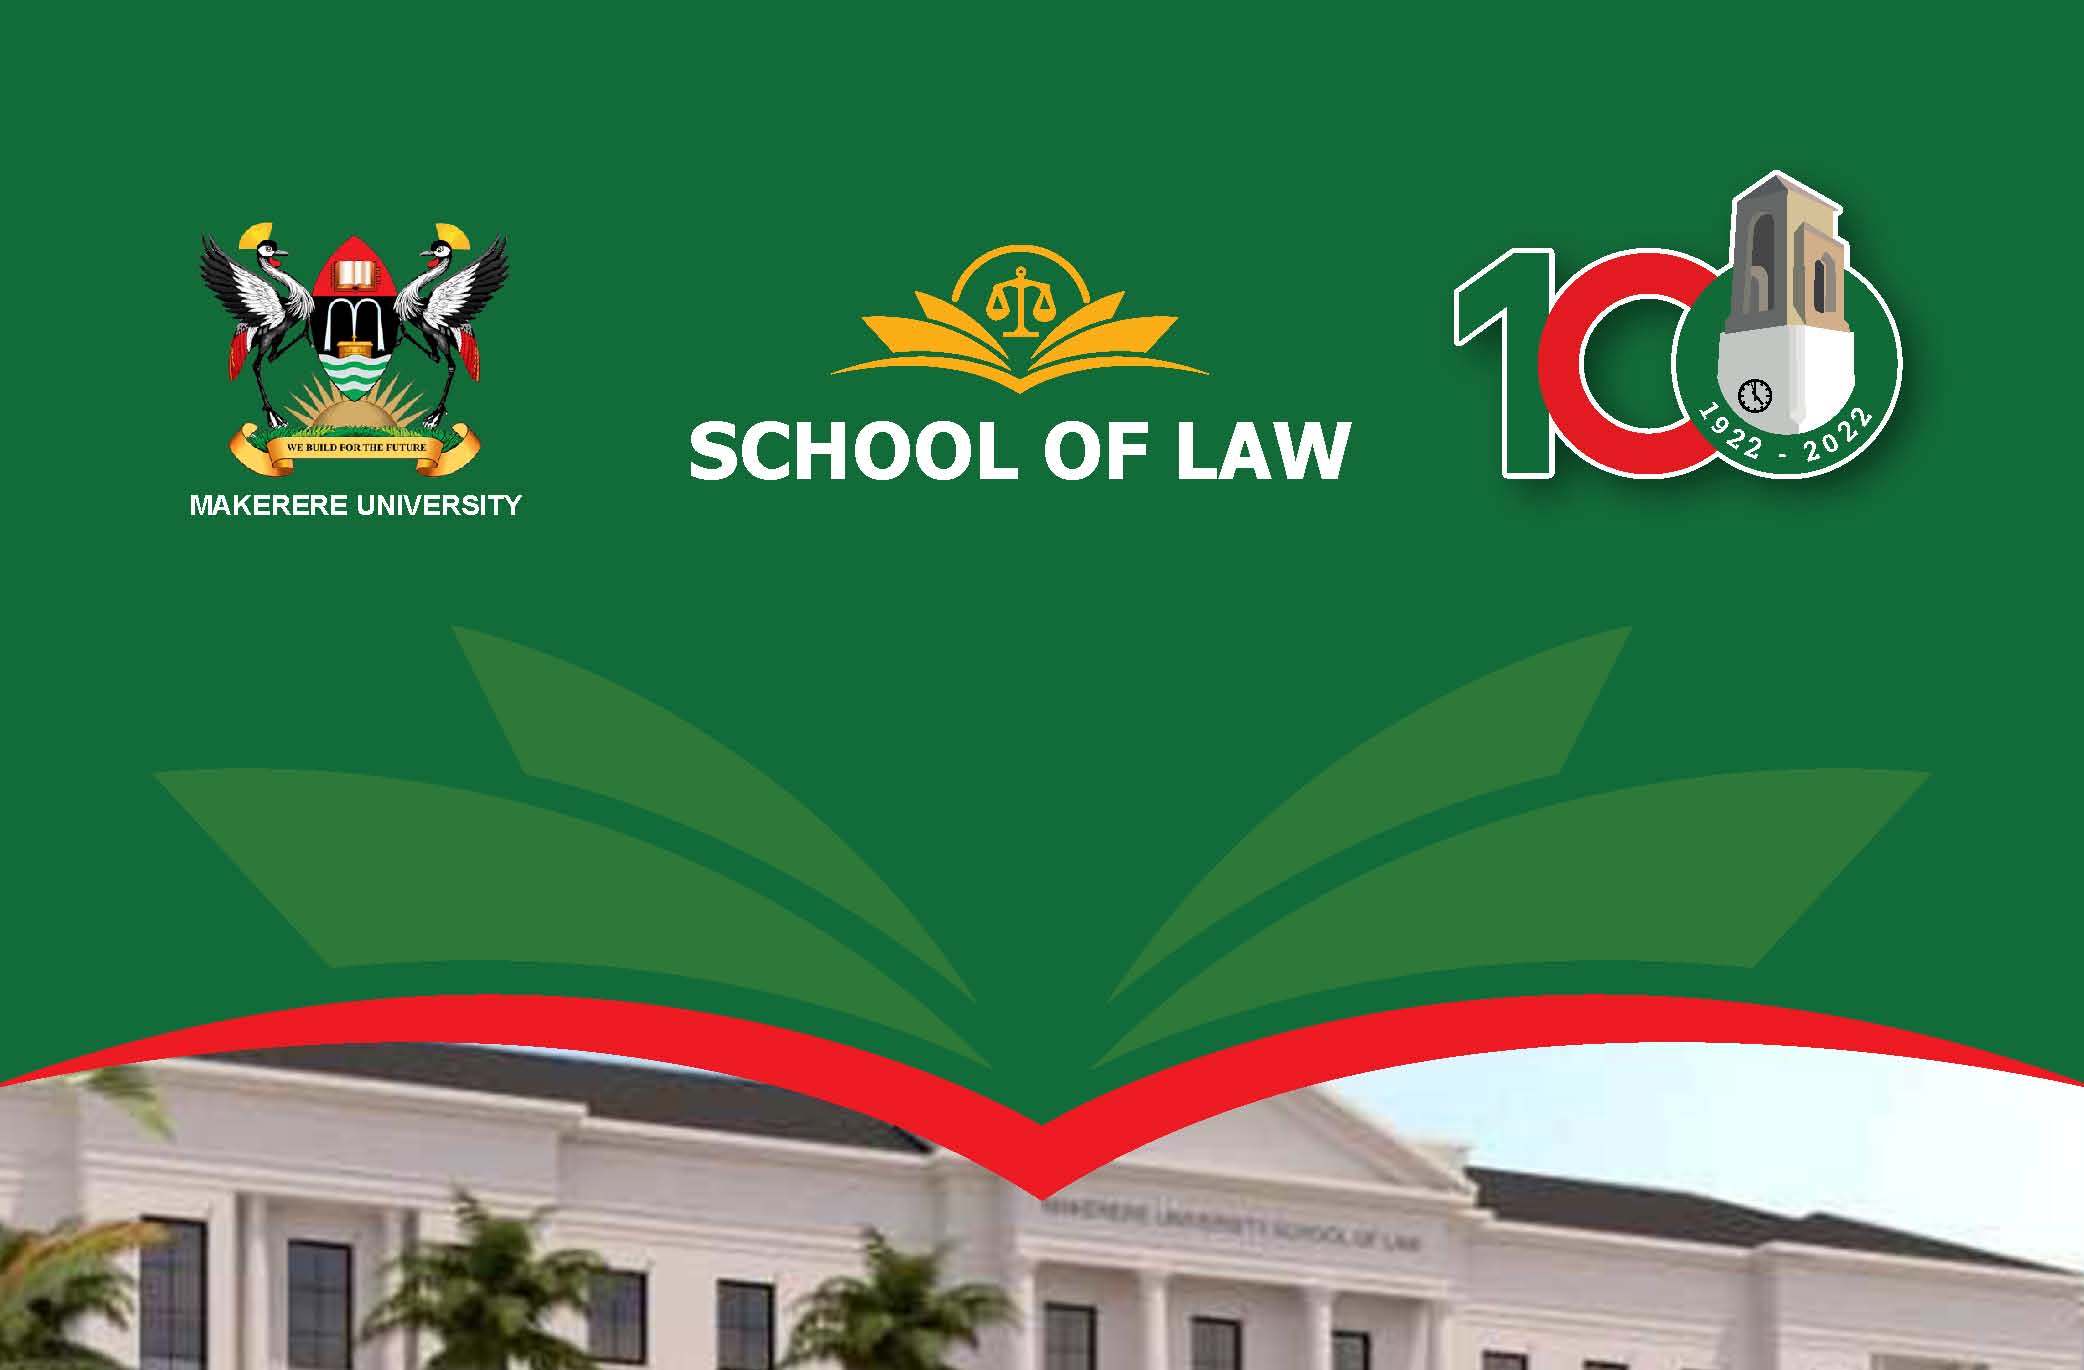 Cover page of the School of Law Annual Report 2021.